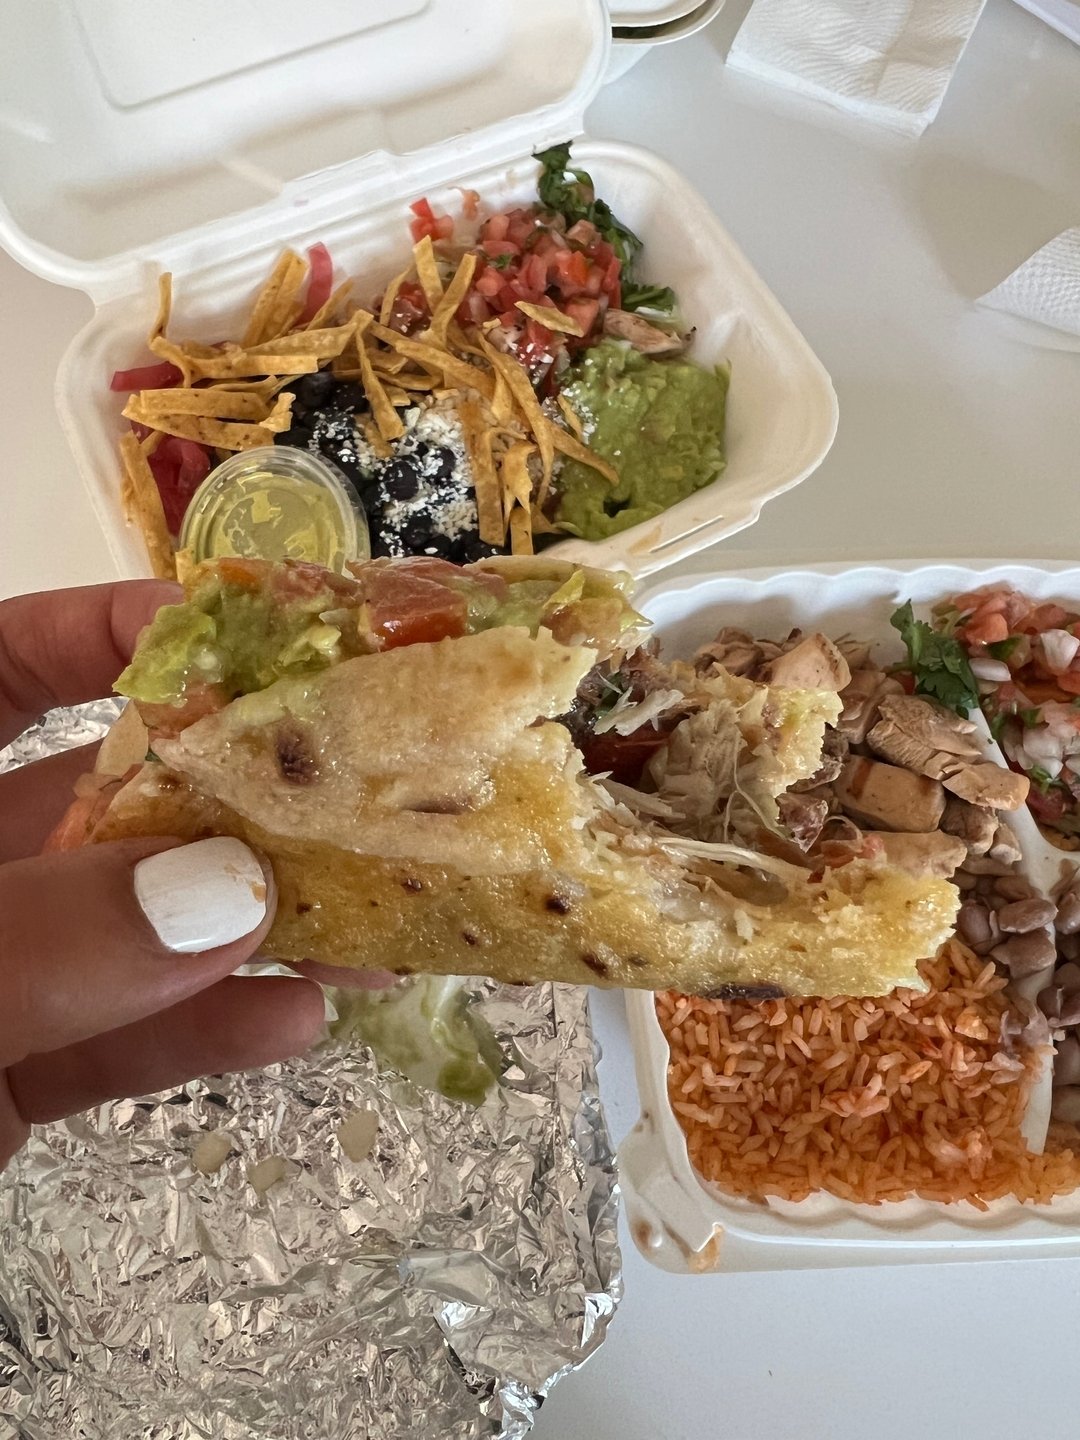 Celebrating 4/20? Top it off with a juicy burrito and taco from Gordos! Get $4.20 off your order of $25 or more with redemption code &ldquo;MUNCHIES&rdquo;. Online only, not available for in-store ordering.